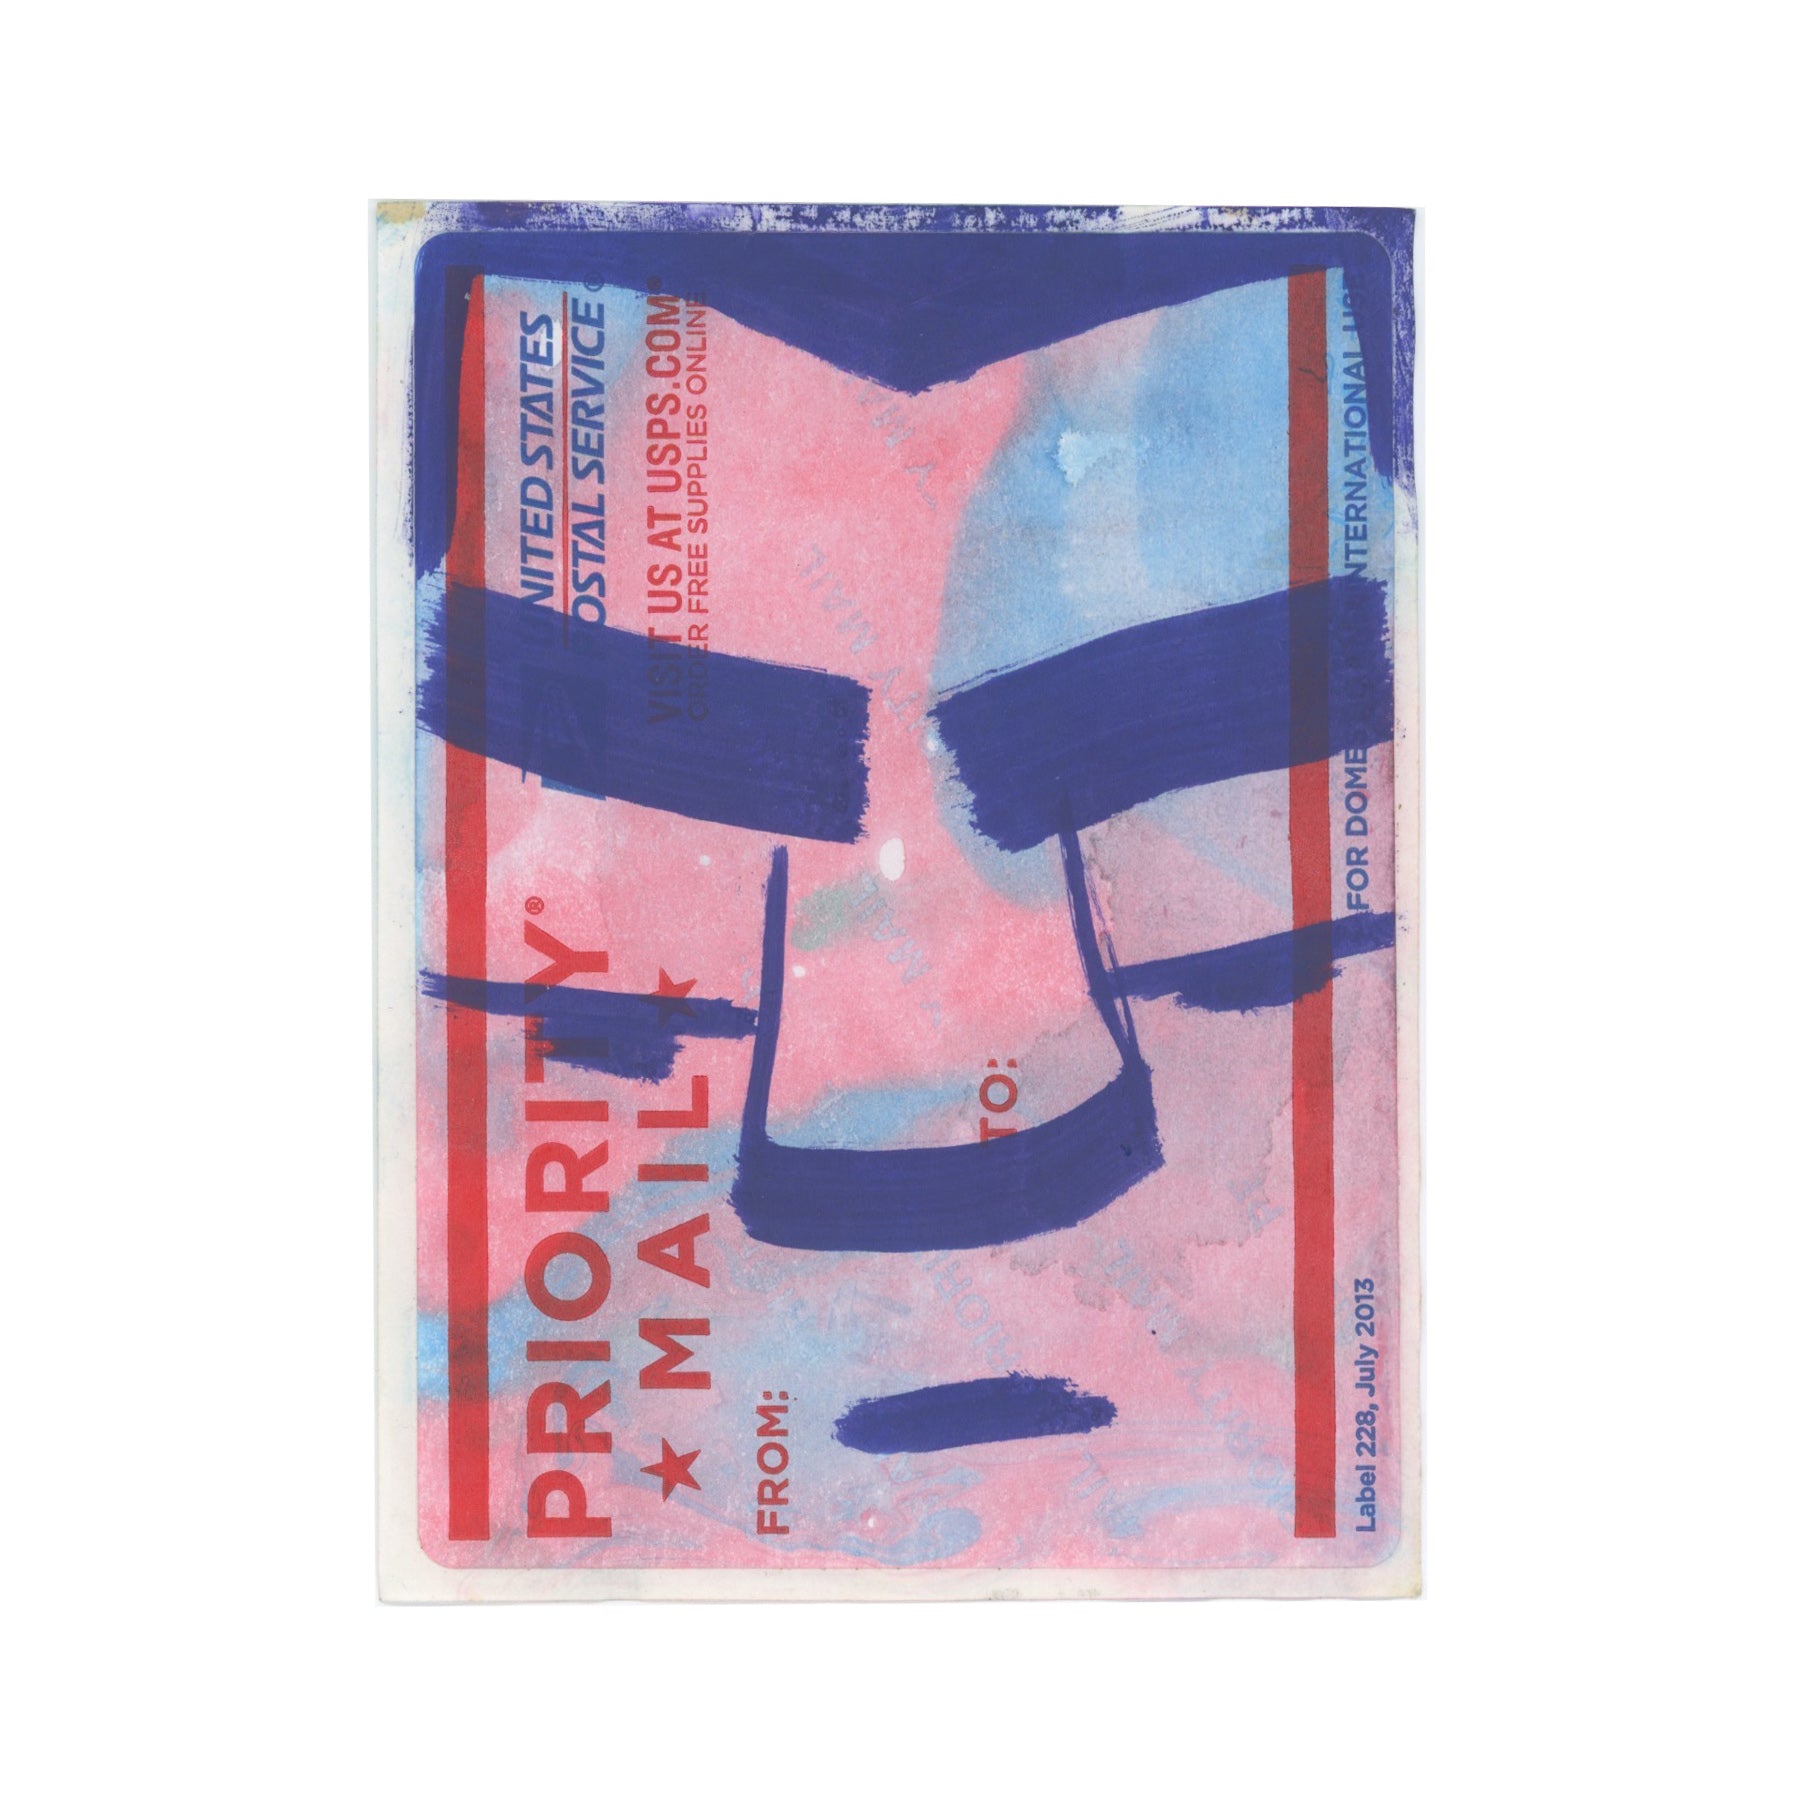 Ellis Disappointed Face USPS PRIORITY MAIL Blue Sticker